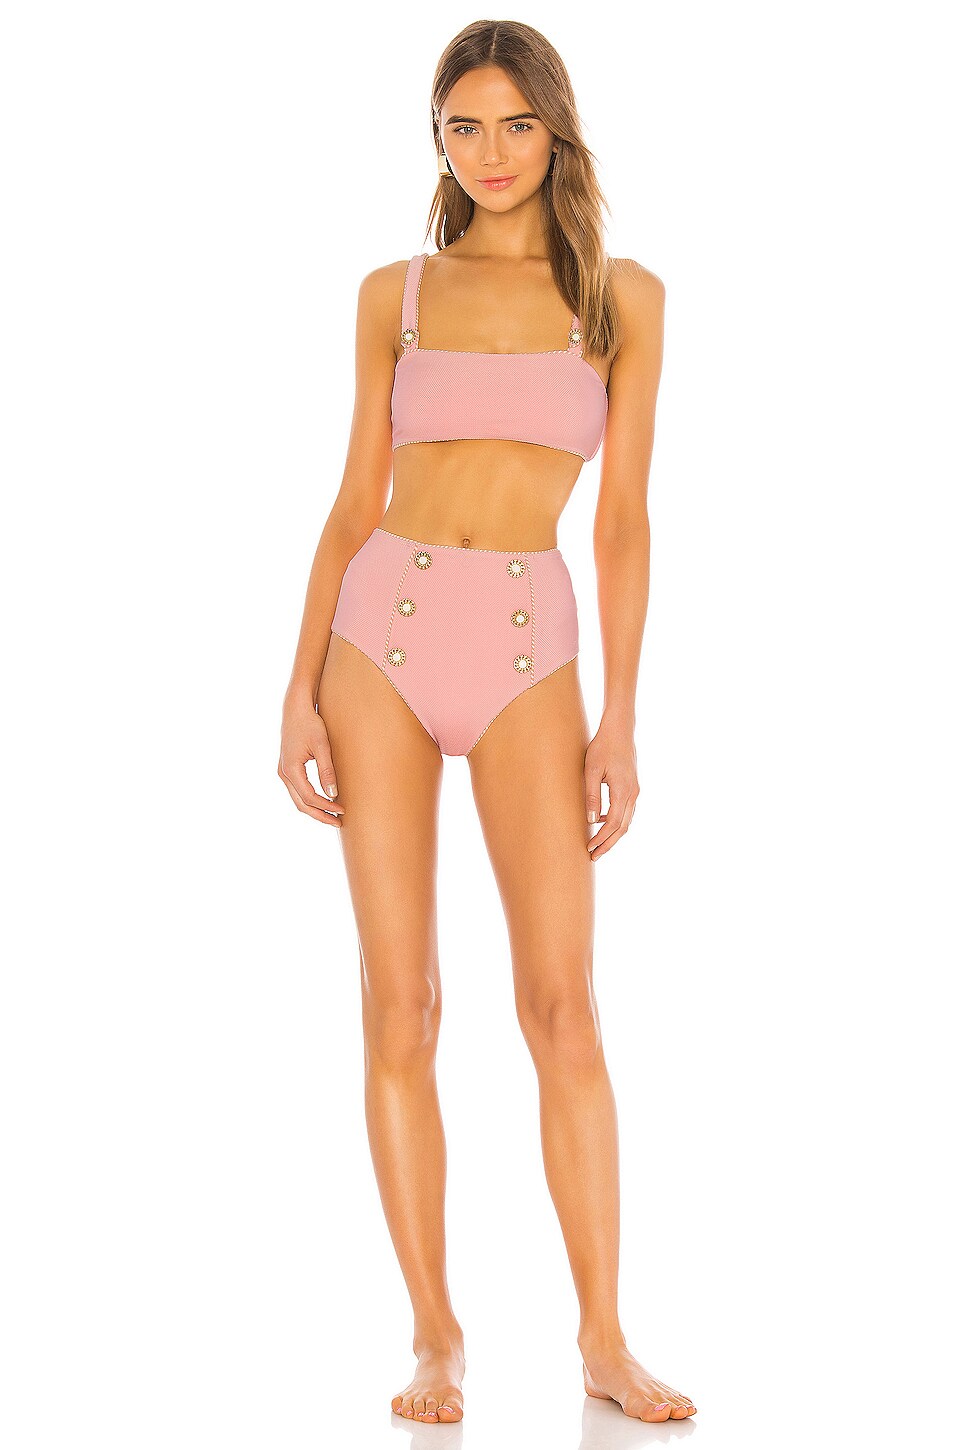 JONATHAN SIMKHAI Piped Luxe Strap Bikini Top in Cherry Blossom - Top Only